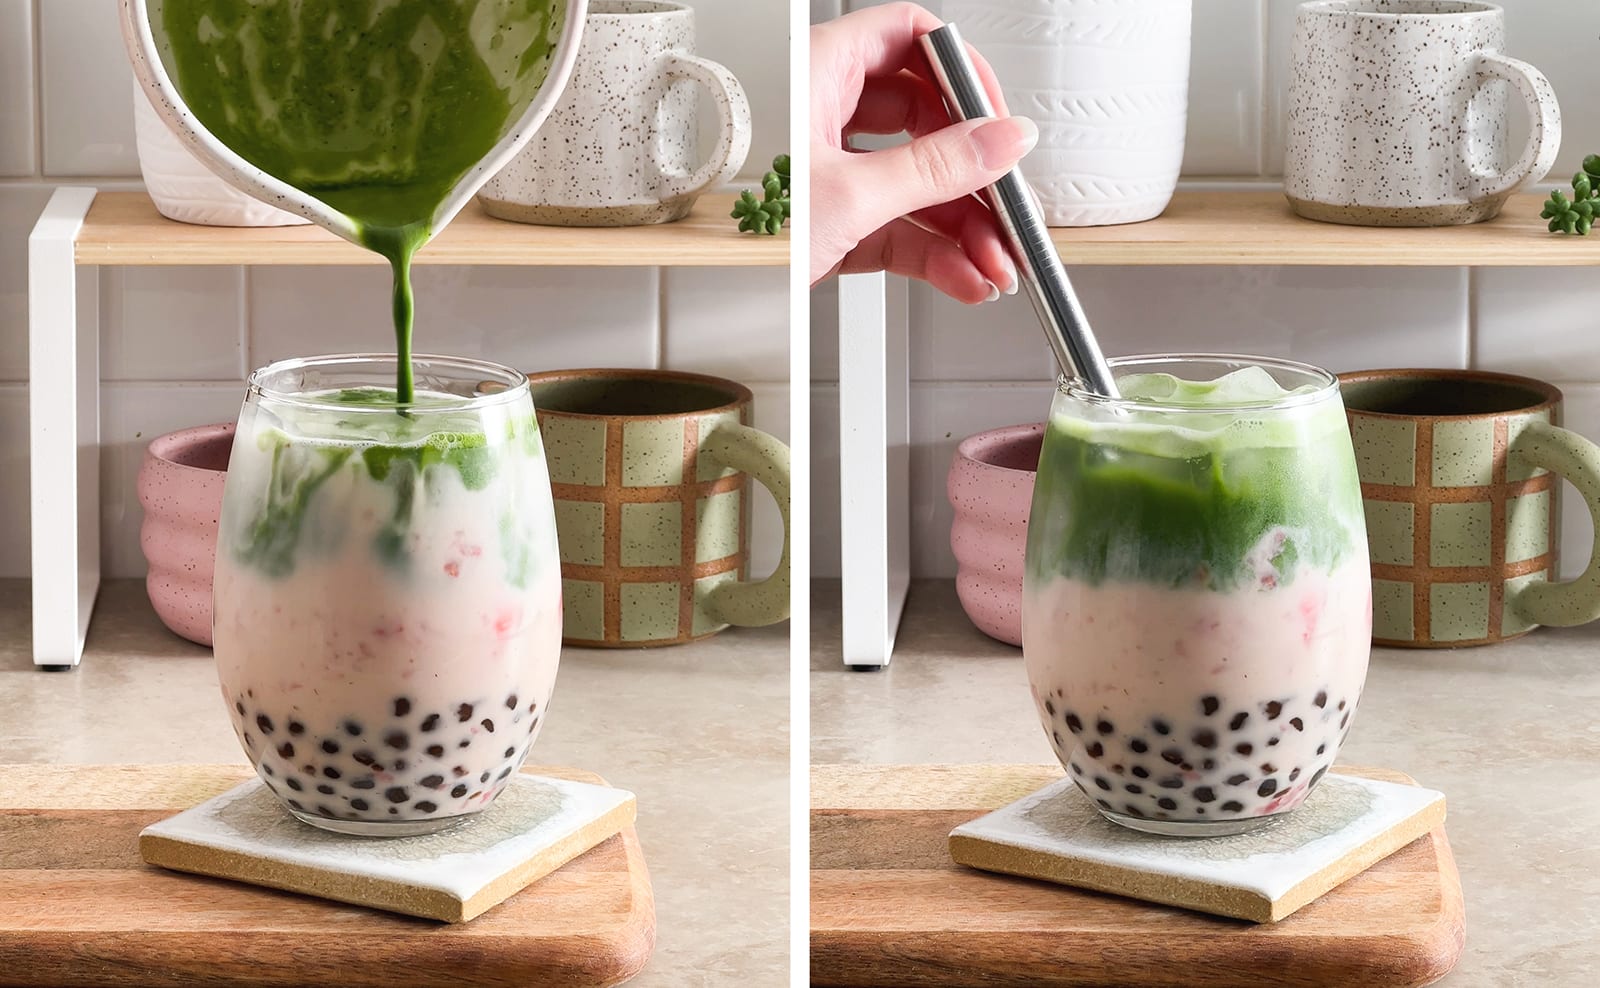 Left to right: pouring matcha on top of strawberry milk mixture, hand putting straw into glass of strawberry matcha boba.